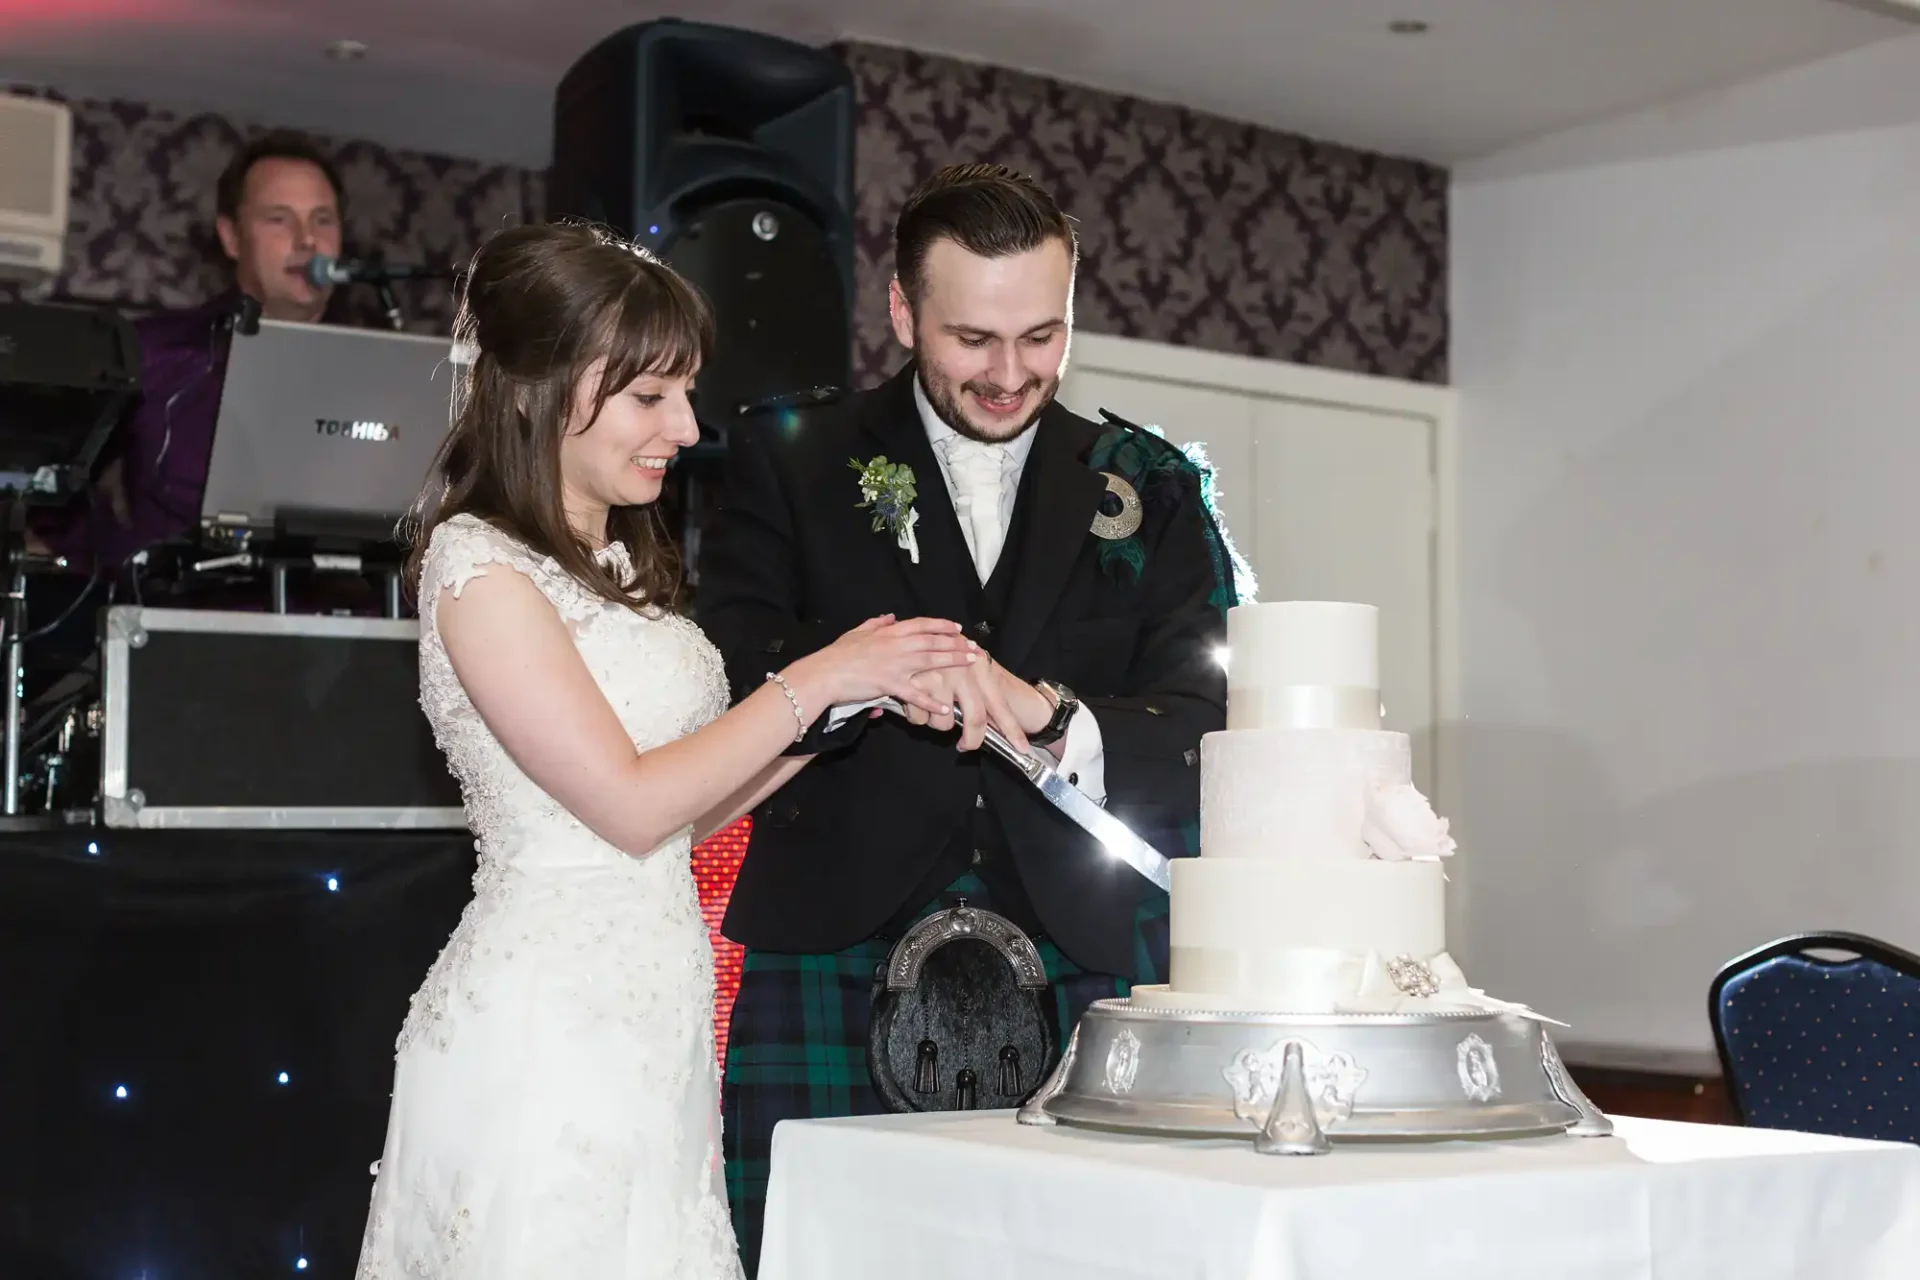 A bride and groom cutting their wedding cake together, smiling, with a dj in the background.